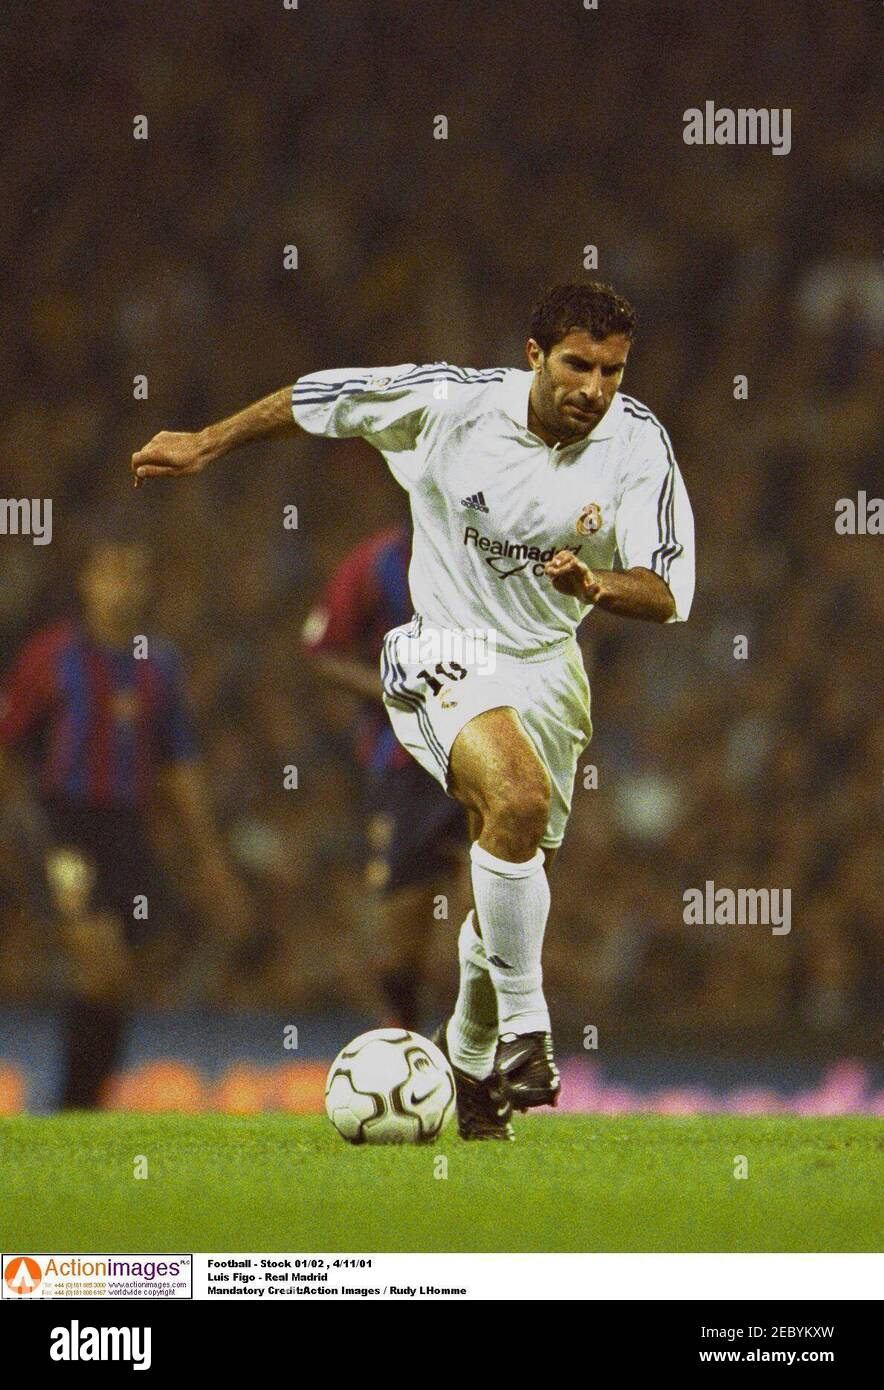 Football - Stock 01/02 , 4/11/01 Luis Figo - Real Madrid Mandatory  Credit:Action Images / Rudy LHomme Stock Photo - Alamy